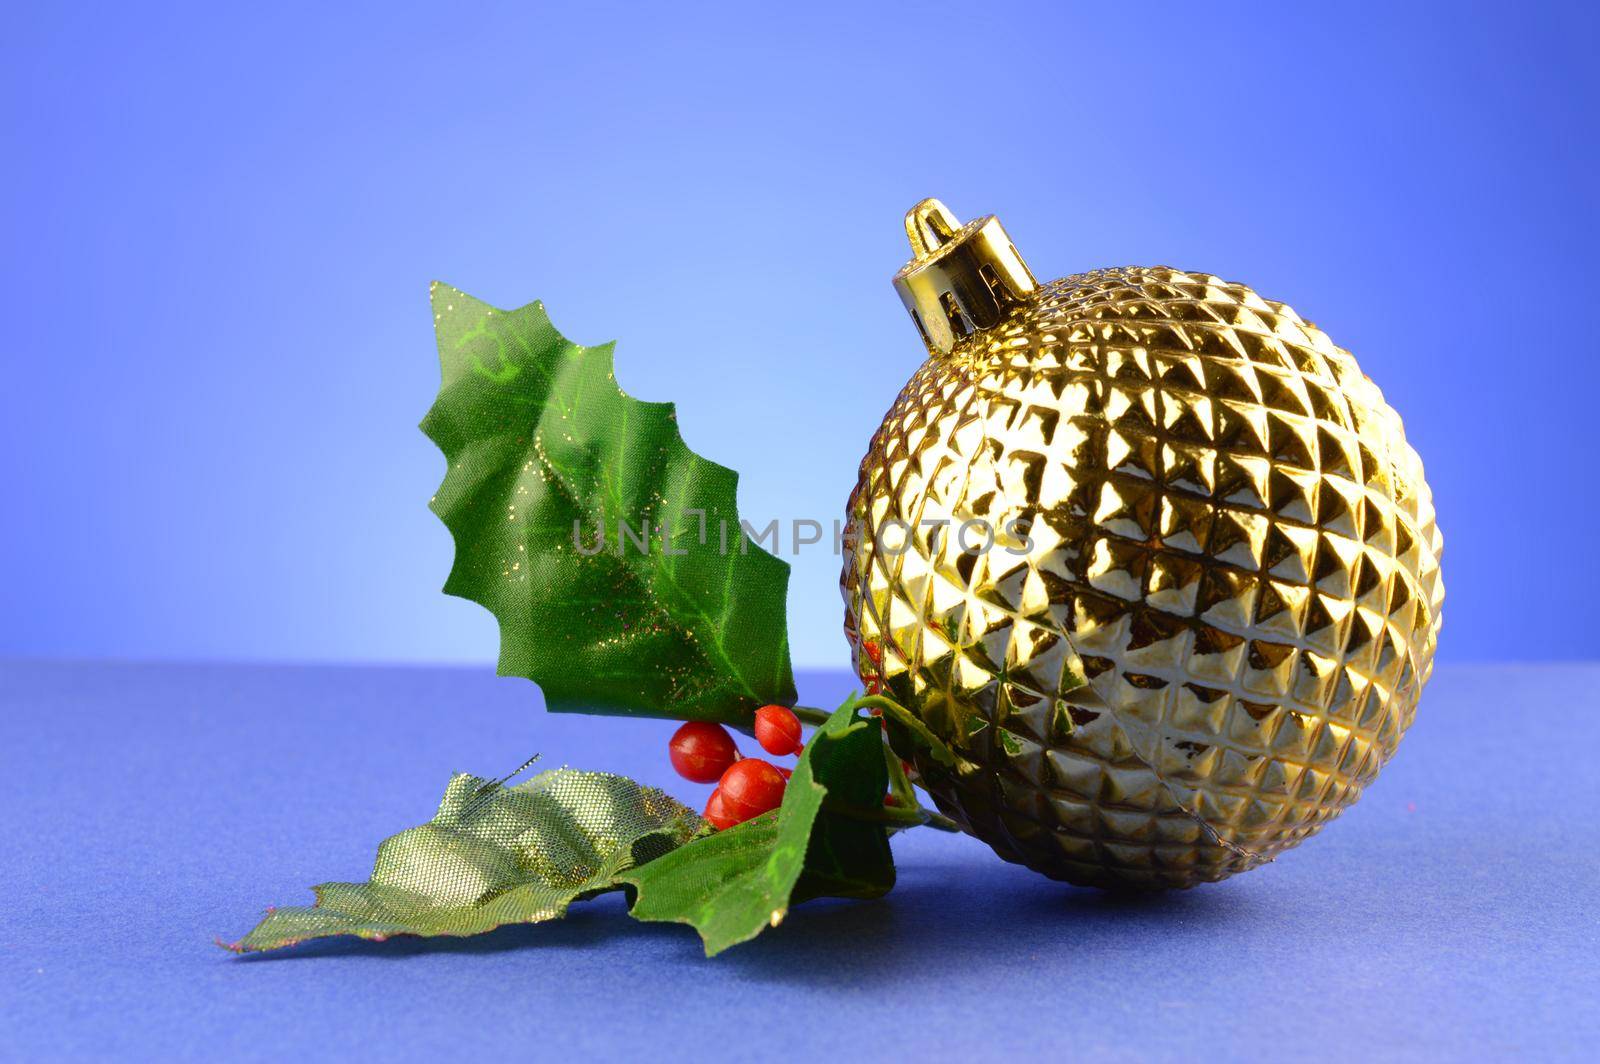 A festive golden bauble with some holly for the Christmas season.